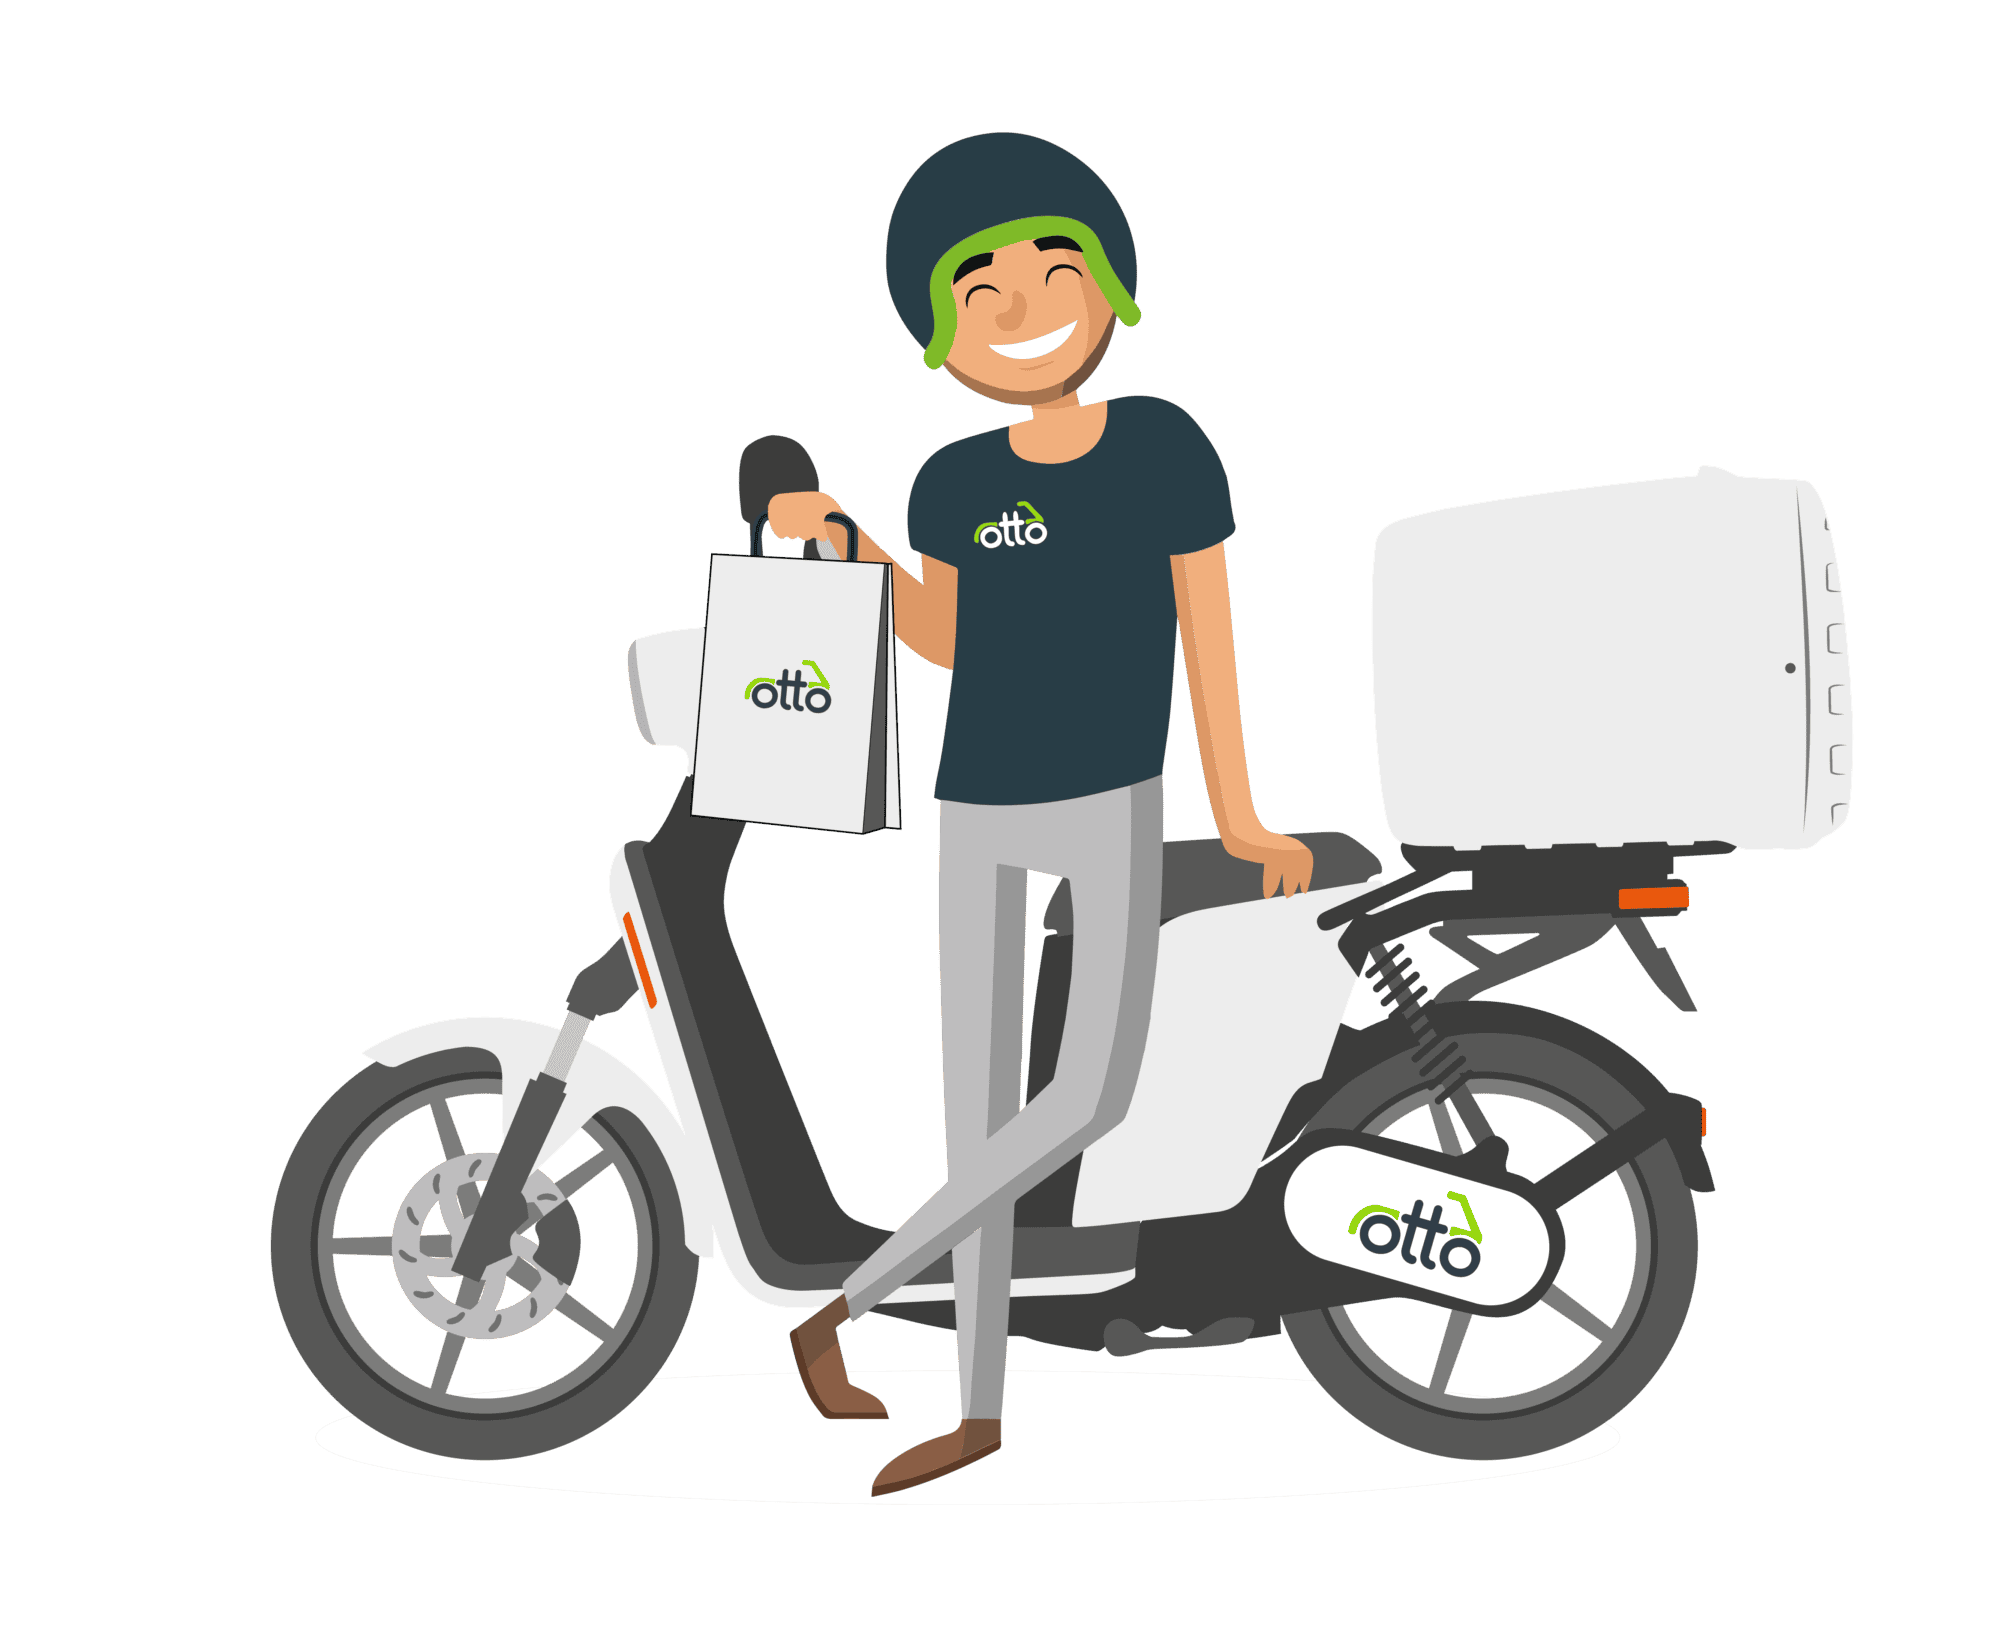 illustration of Otto Scooter delivery rider smiling and standing next to his Askoll e-moped